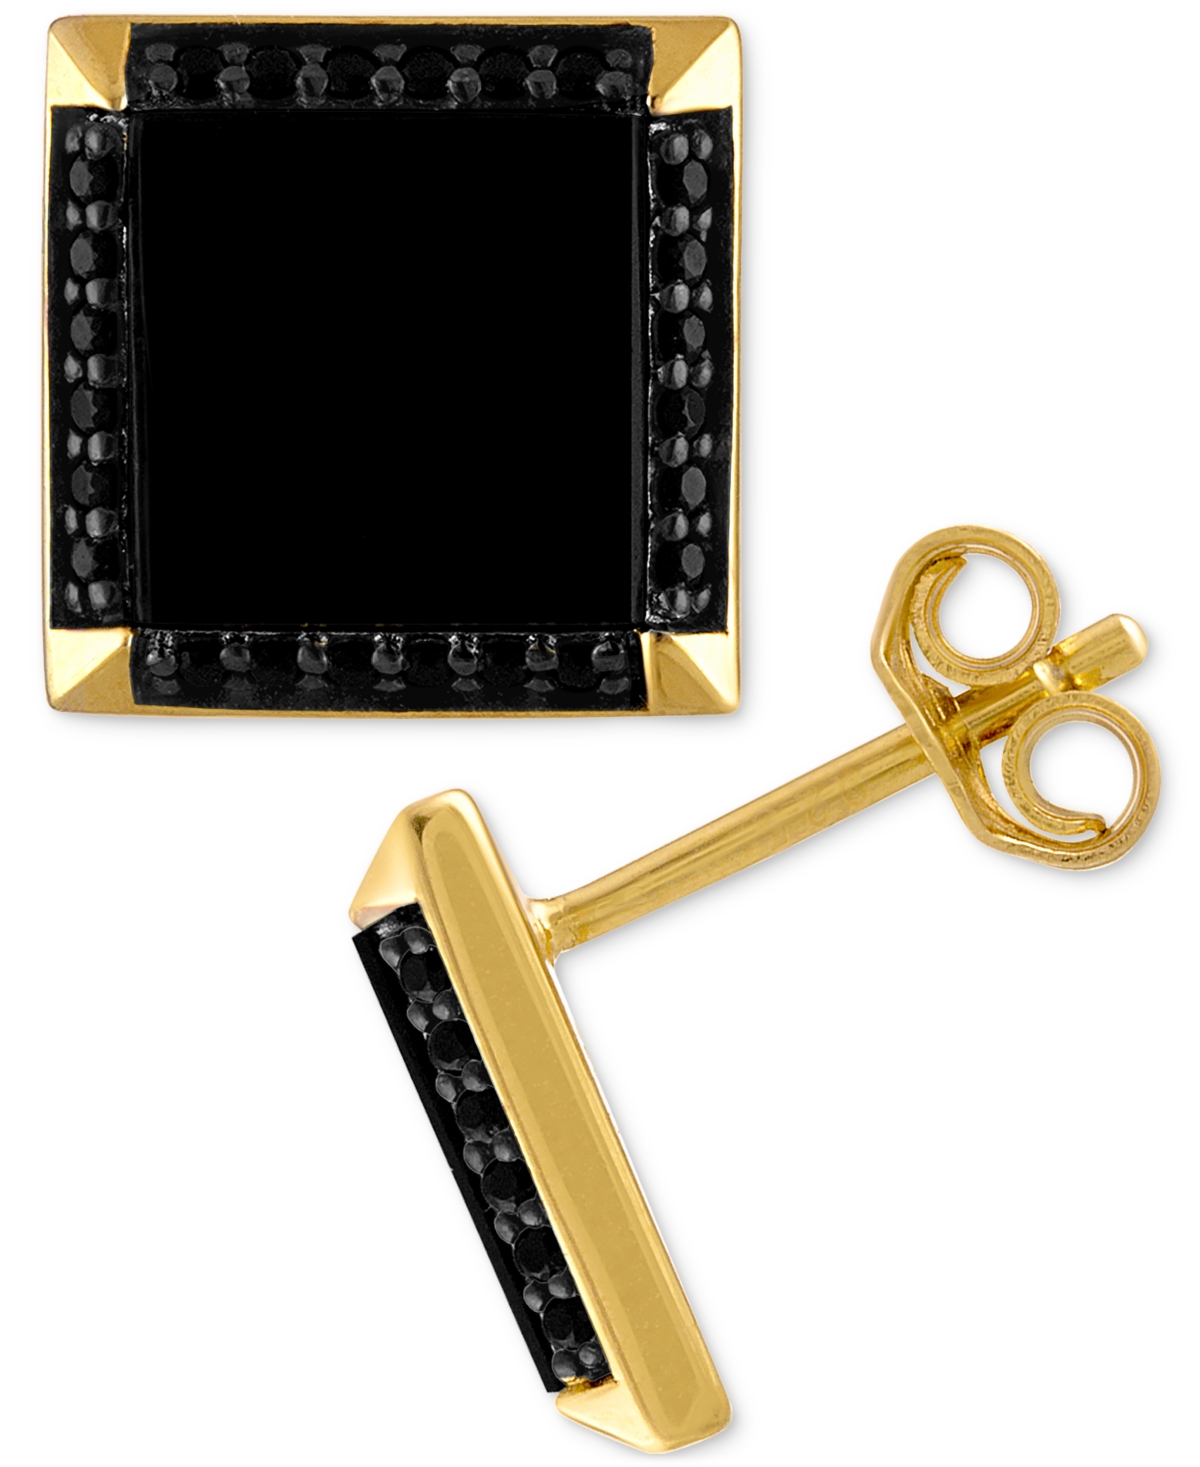 Men's Onyx & Black Spinel Square Stud Earrings in 18k Gold-Plated Sterling Silver, Created for Macy's - Gold Over Silver